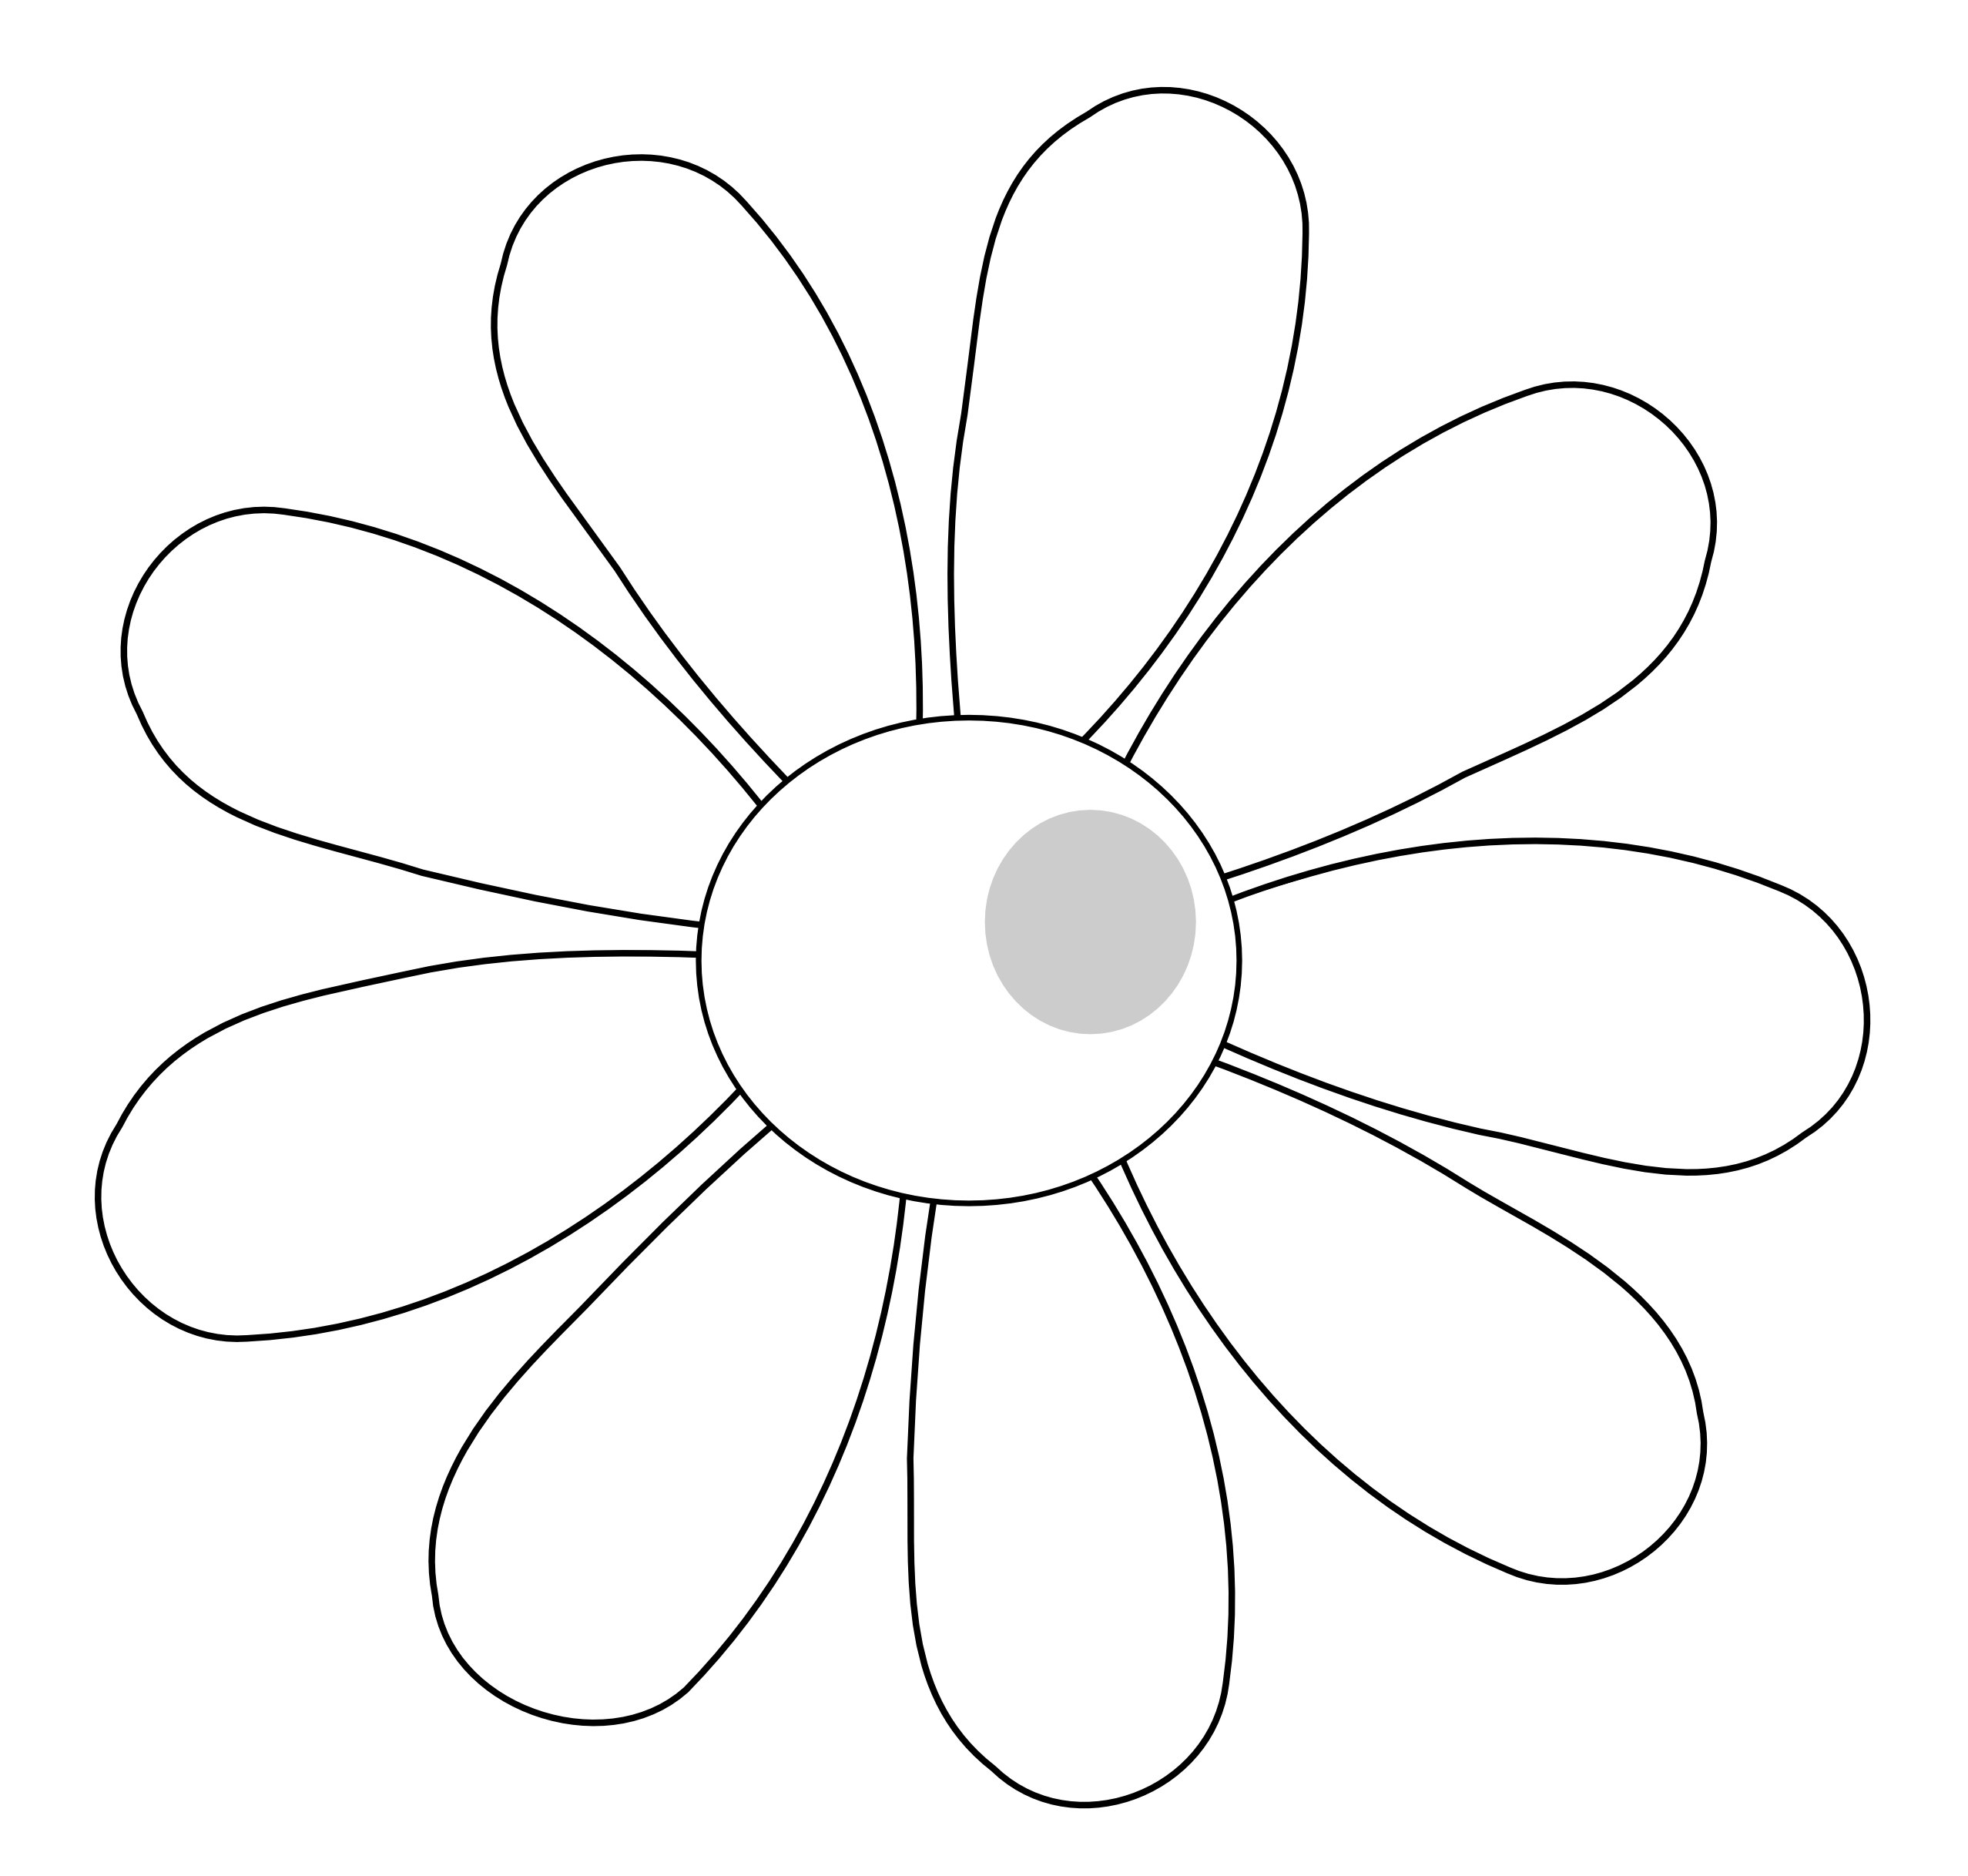 Daisies Clipart Daisy Outline Daisies Daisy Outline Transparent FREE For Download On